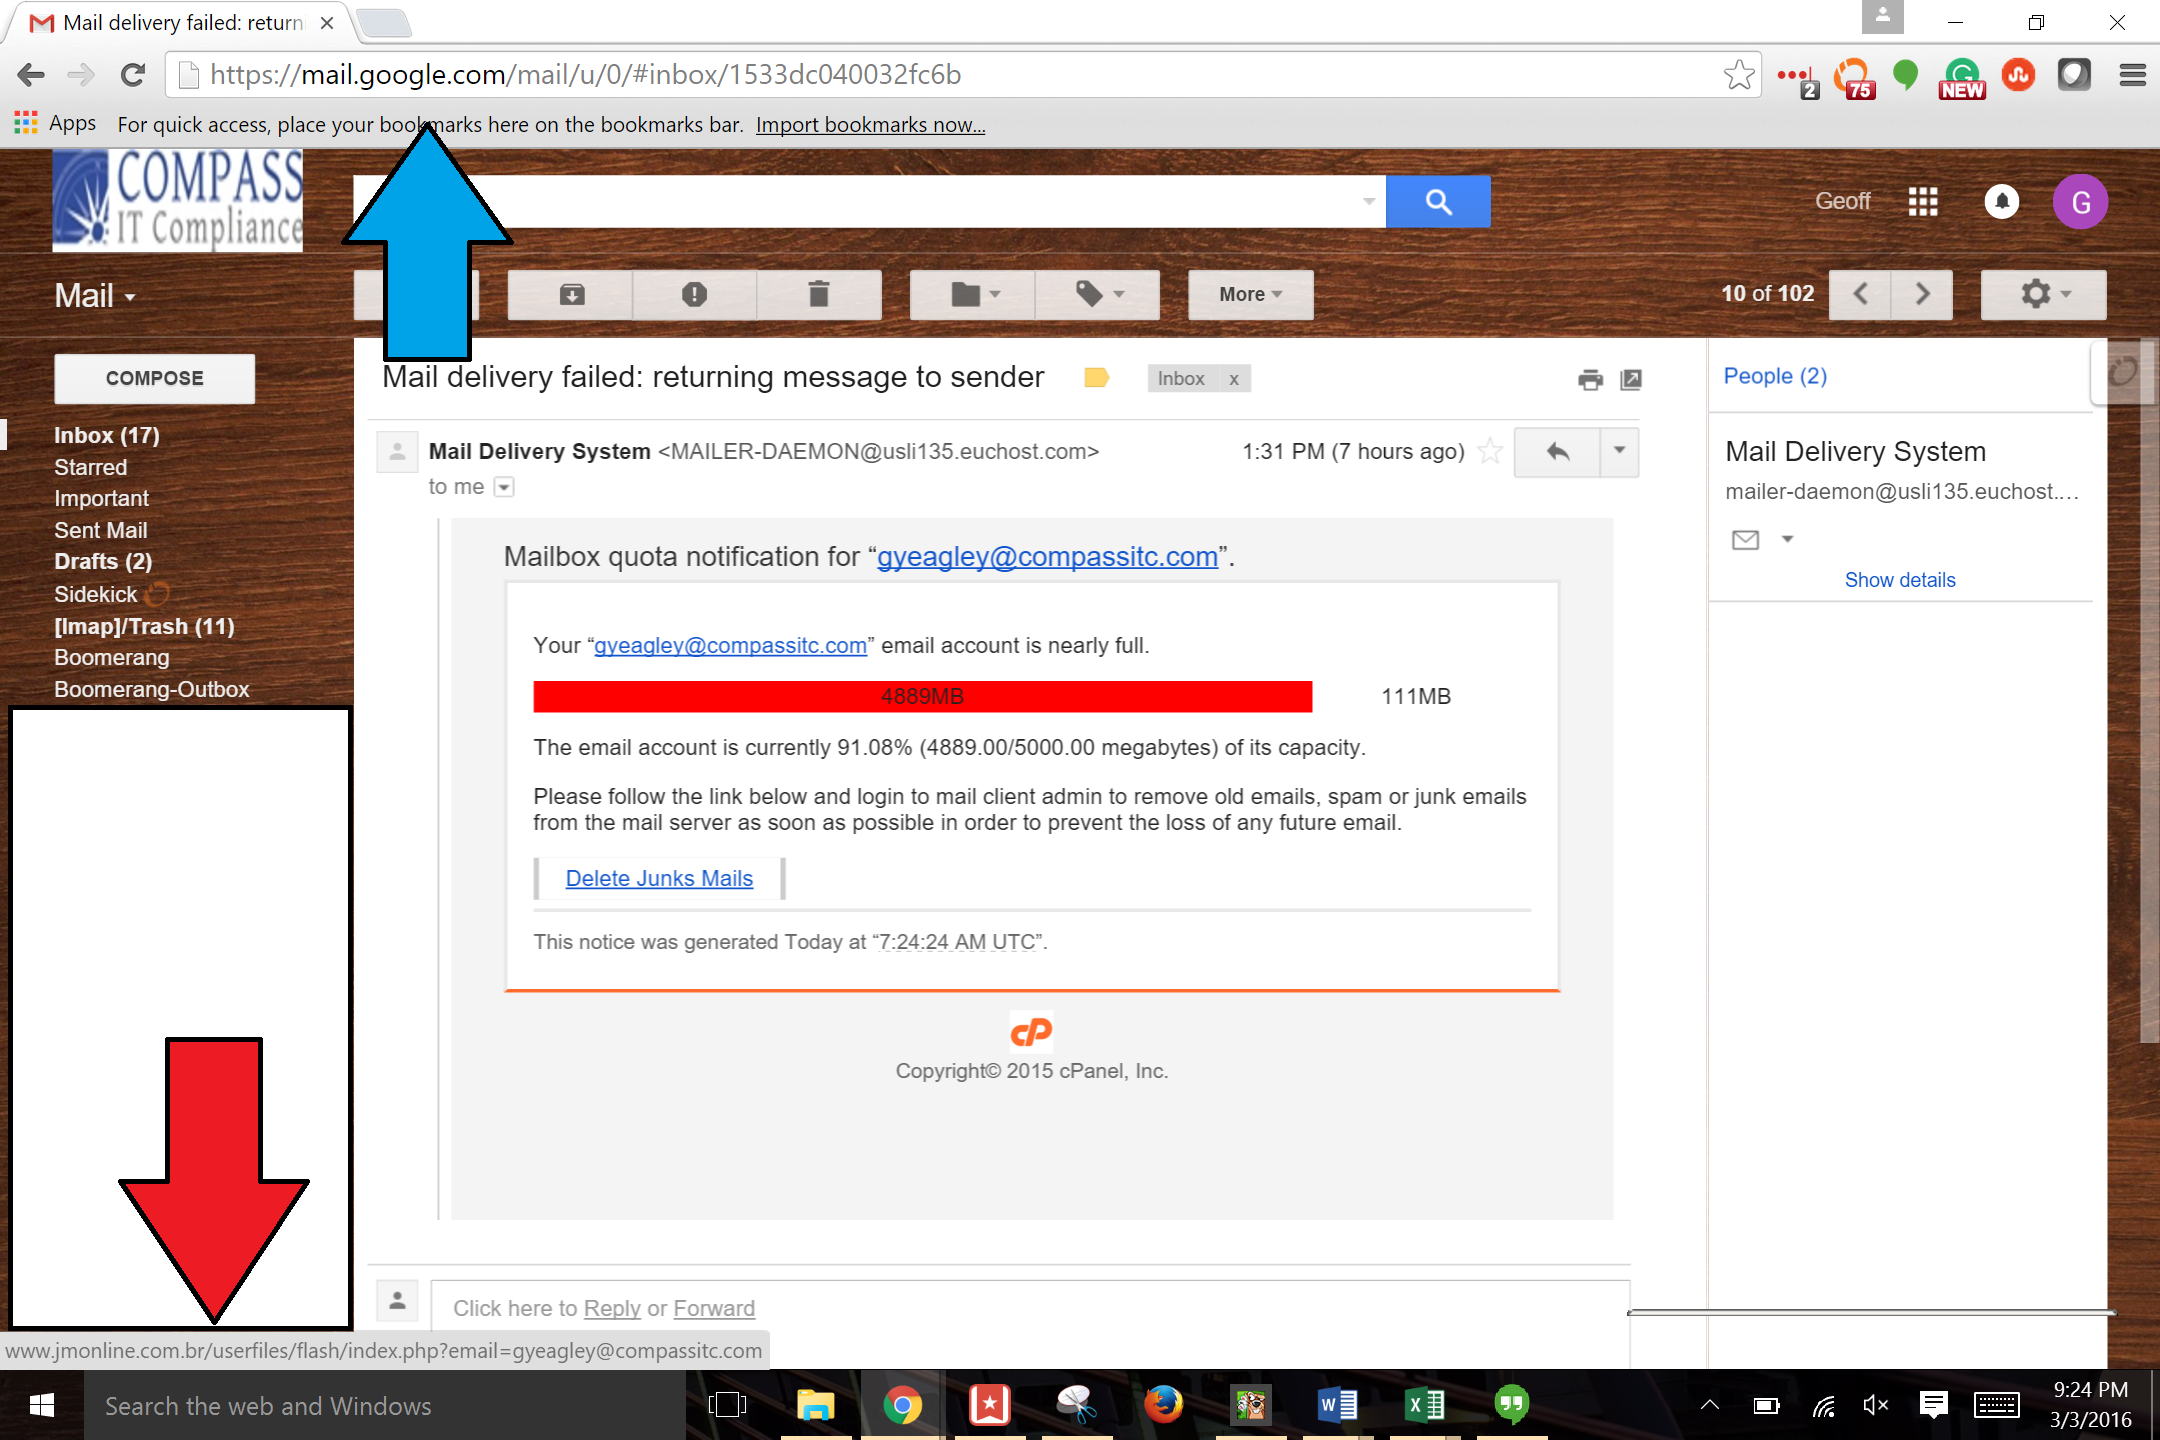 An example of a phishing email shows a scammy link path